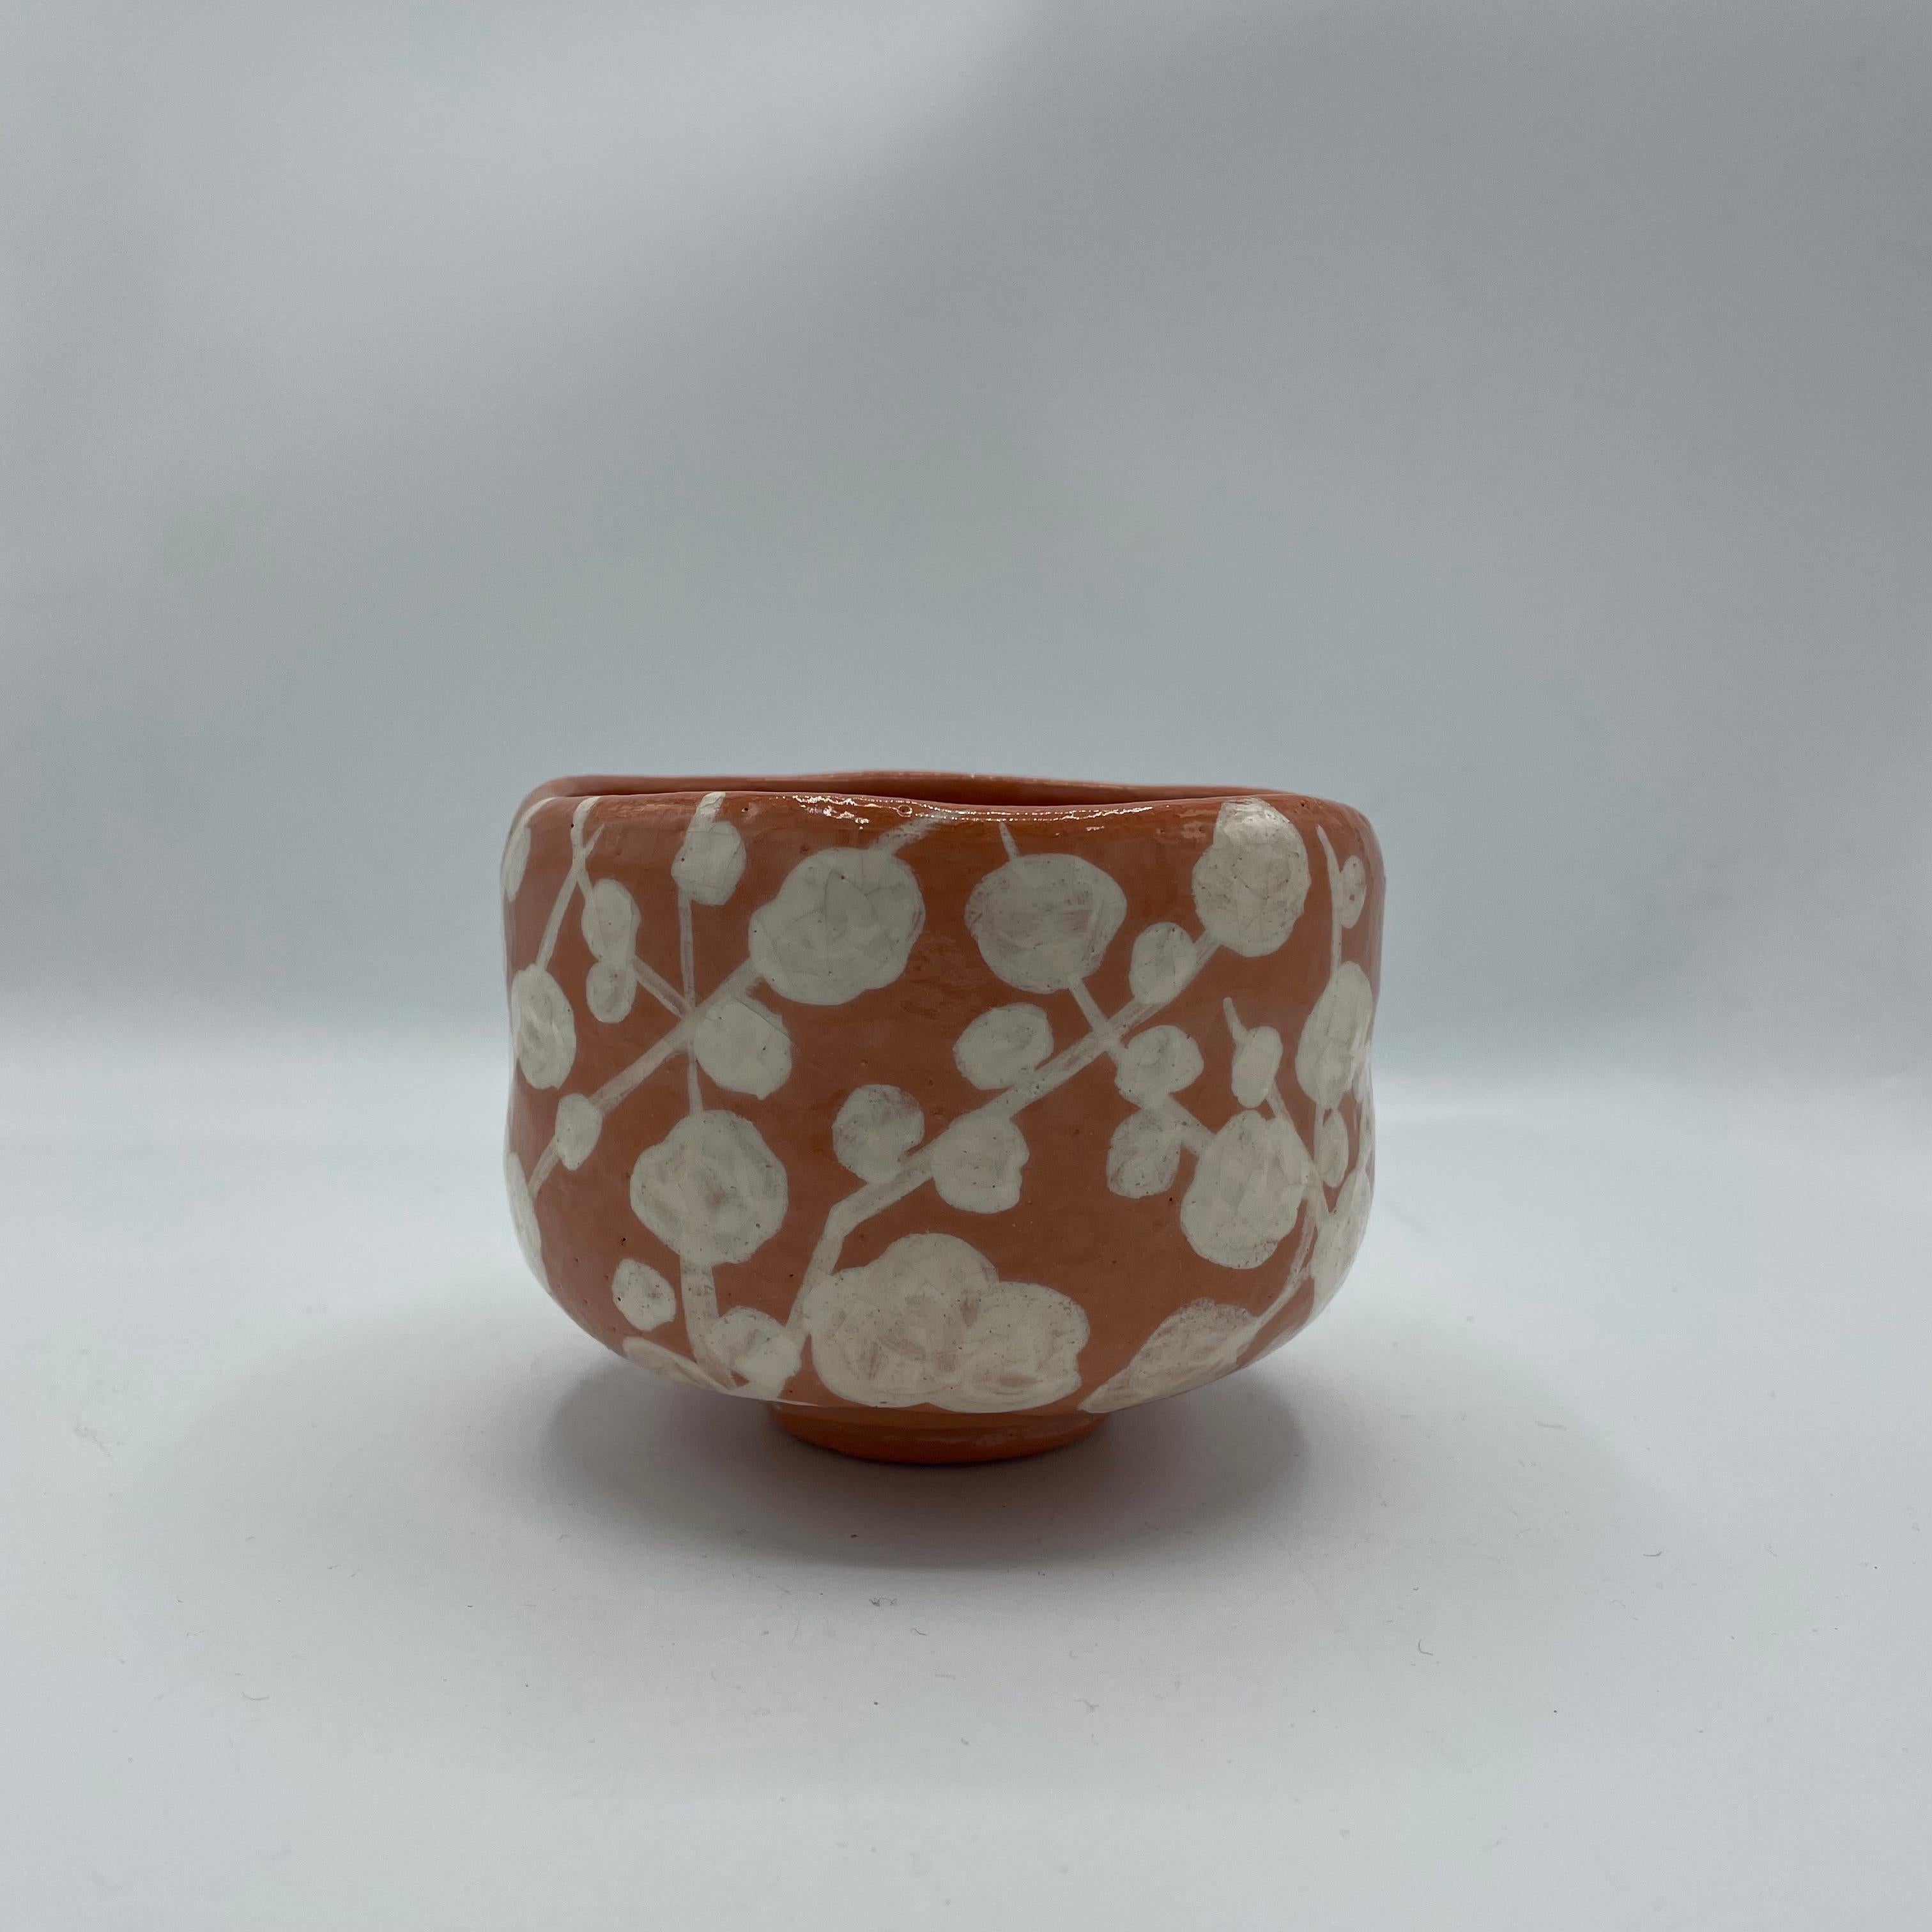 This is a tea bowl for matcha. 
It was used to use during tea ceremony. 
This bowl is made with porcelain and it will come with a wooden box. 
This bowl was made with style Raku (Raku yaki). It was made by Rakunyu Yoshimura.

Raku ware is a type of